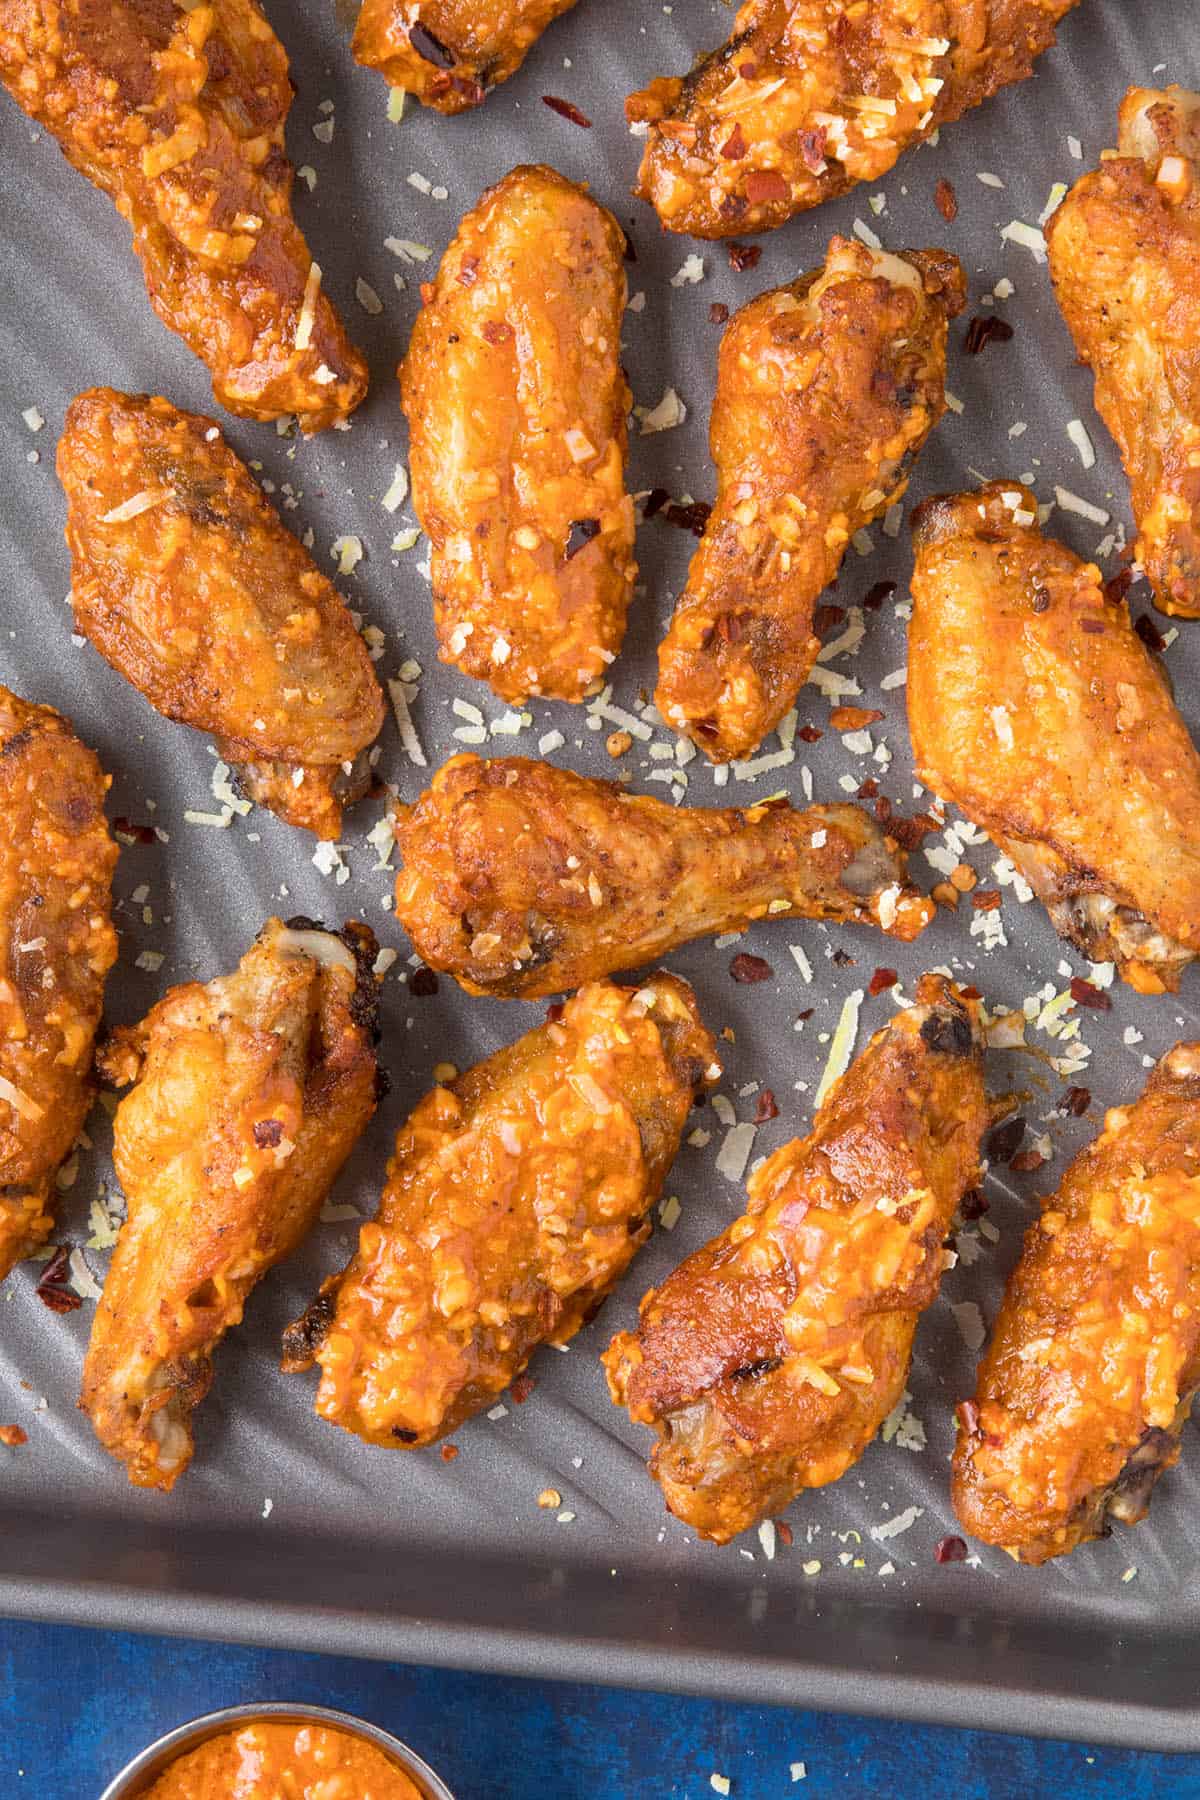 Garlic Parmesan Chicken Wings looking extremely yum.